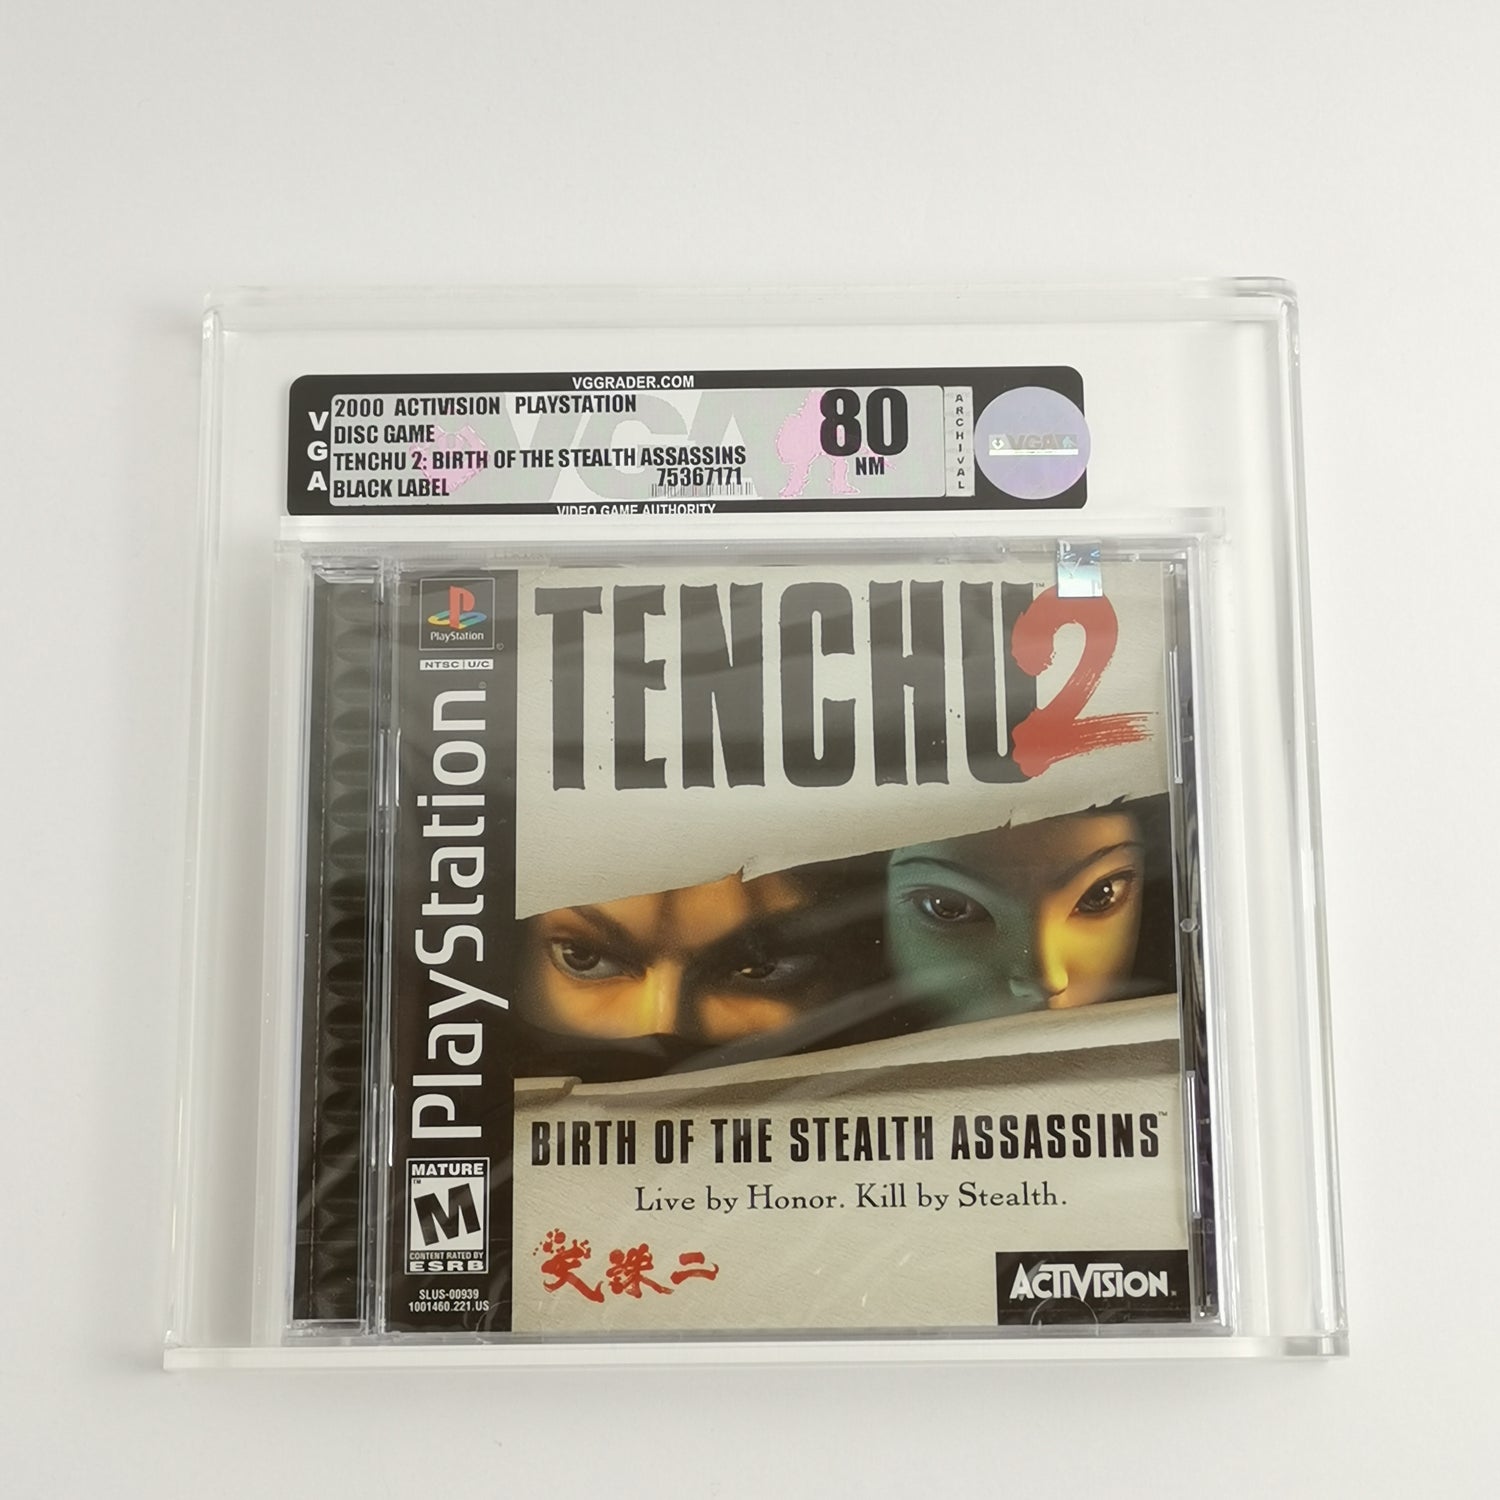 Sony Playstation 1 Game: Tenchu ​​2 Birth of The Stealth Assassins - VGA 80 NM